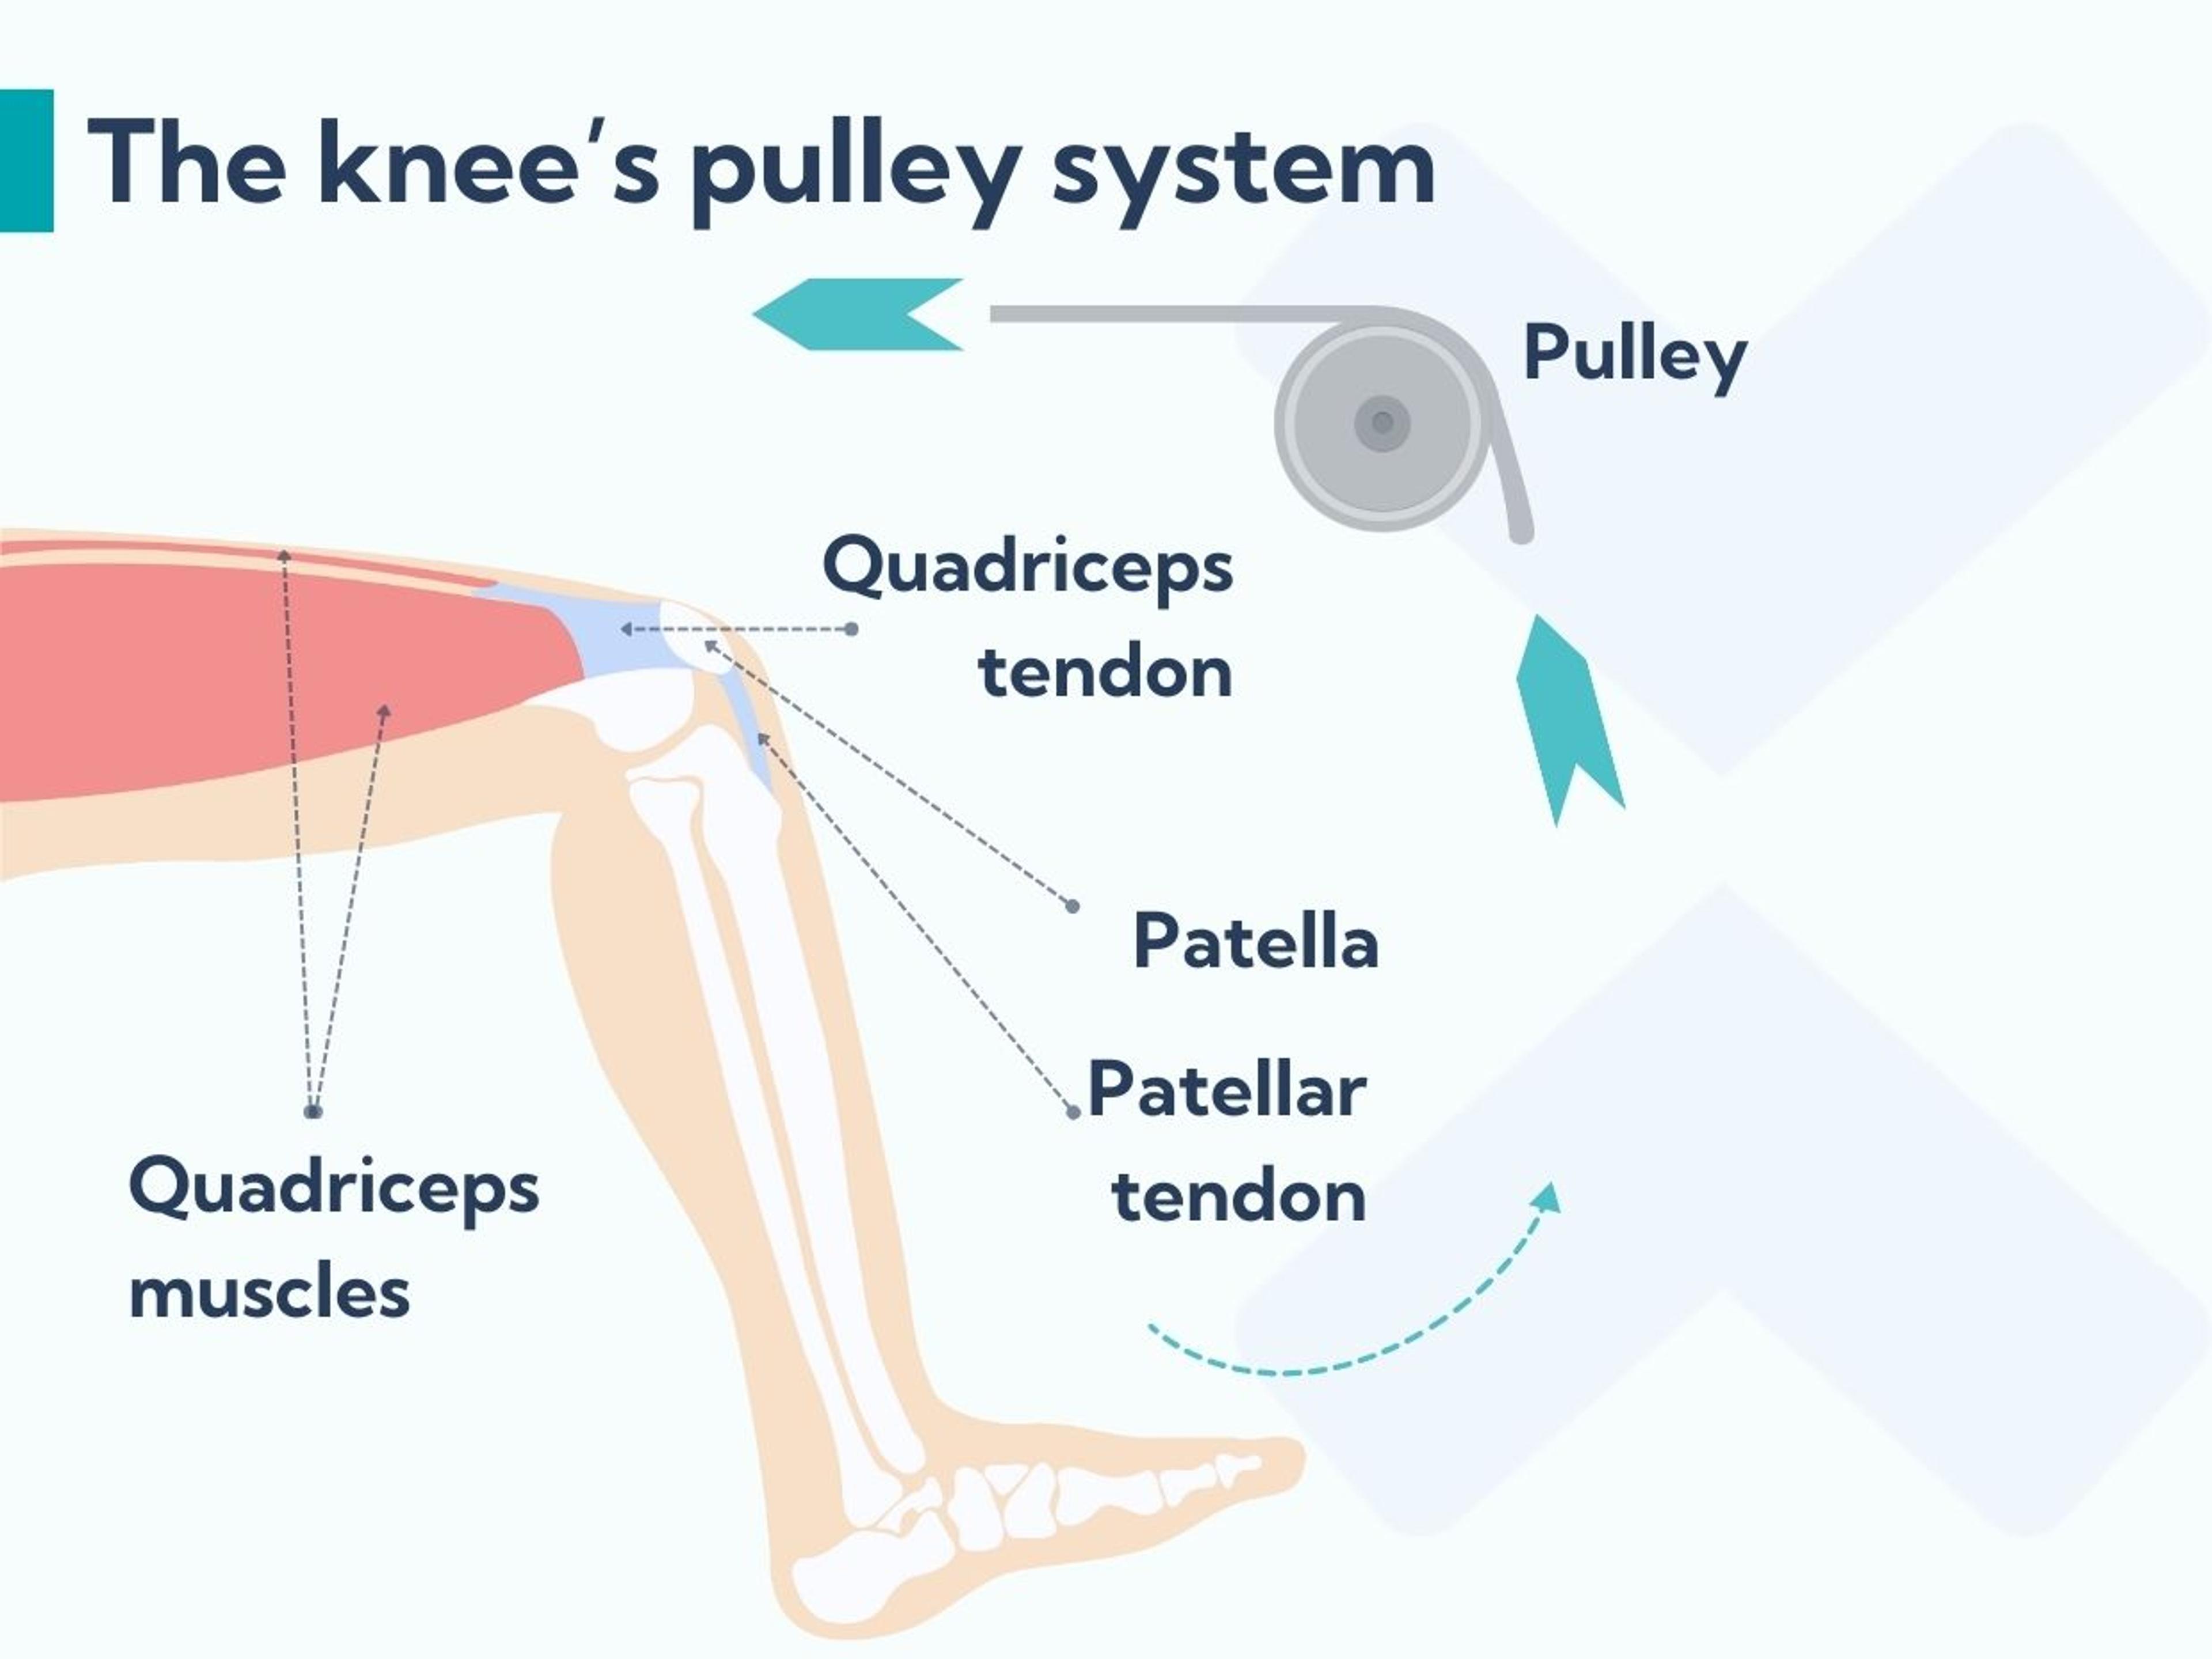 Your kneecap (patella) sits inside the tendon that connects your quadriceps muscles (quads) to your shin bone. 